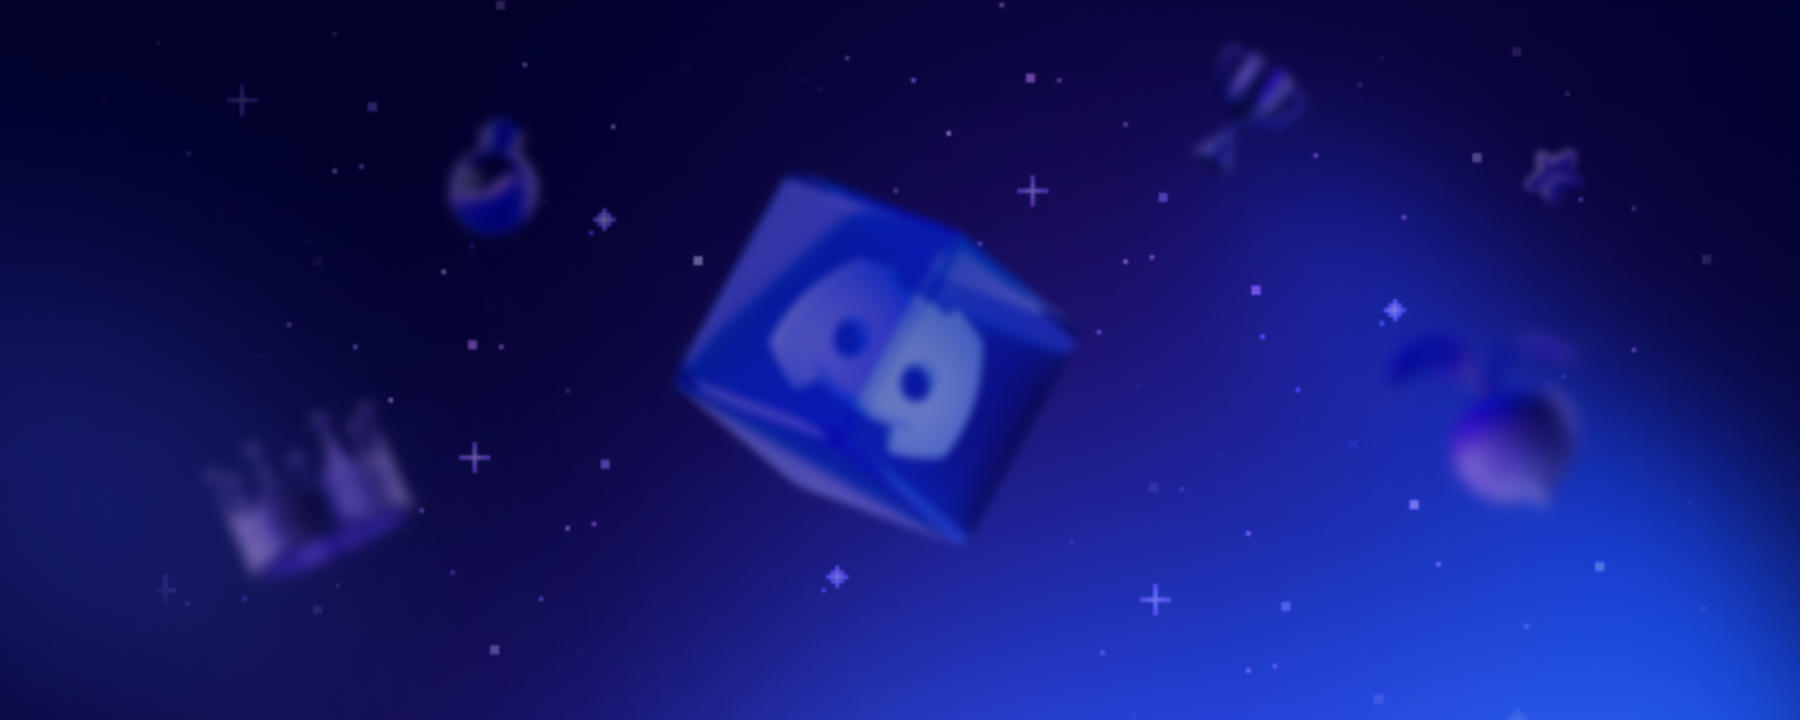 An out-of-focus floating cube containing the Discord logo in a dark blurple starfield. Surrounding it is blurred items such as potion bottles and trophies.